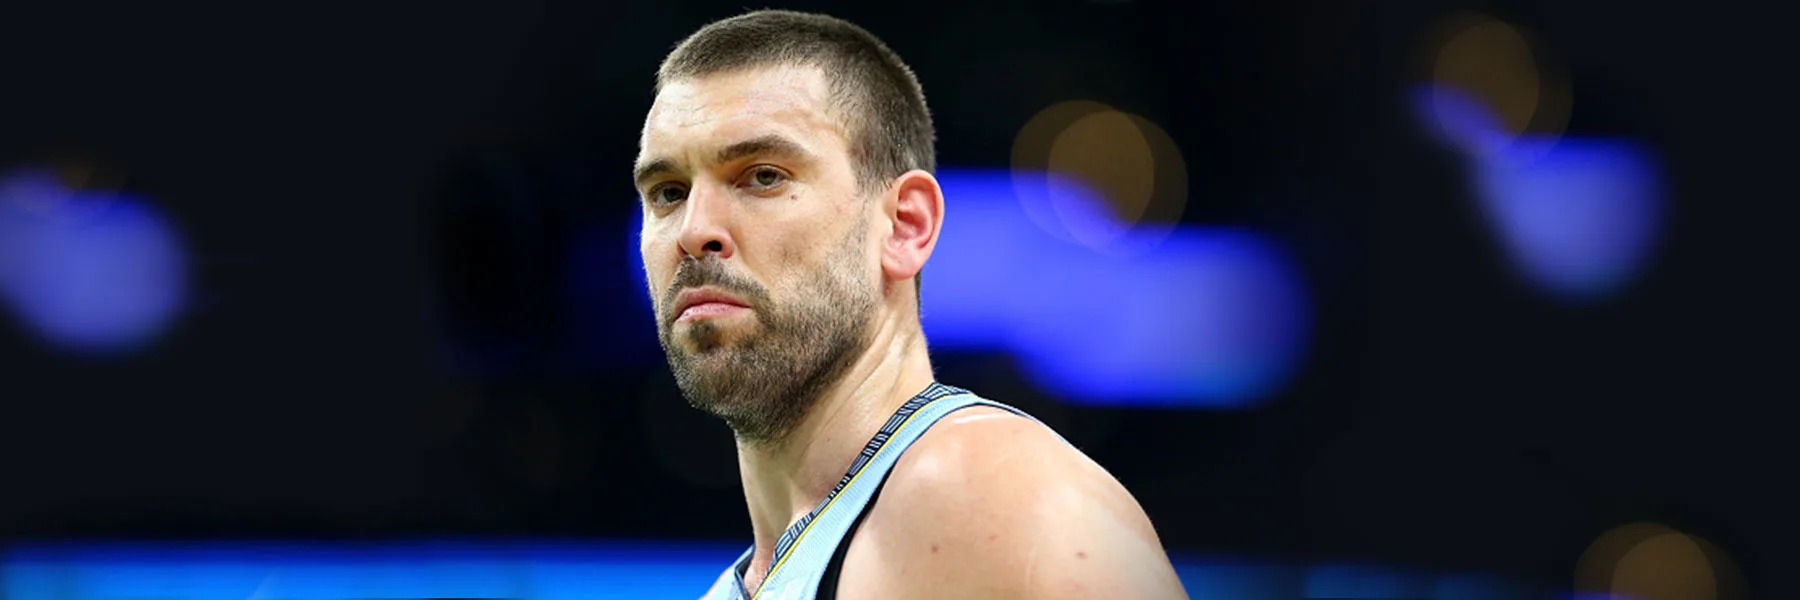 Podcast No. 8: Marc Gasol, 3-Time NBA All-Star